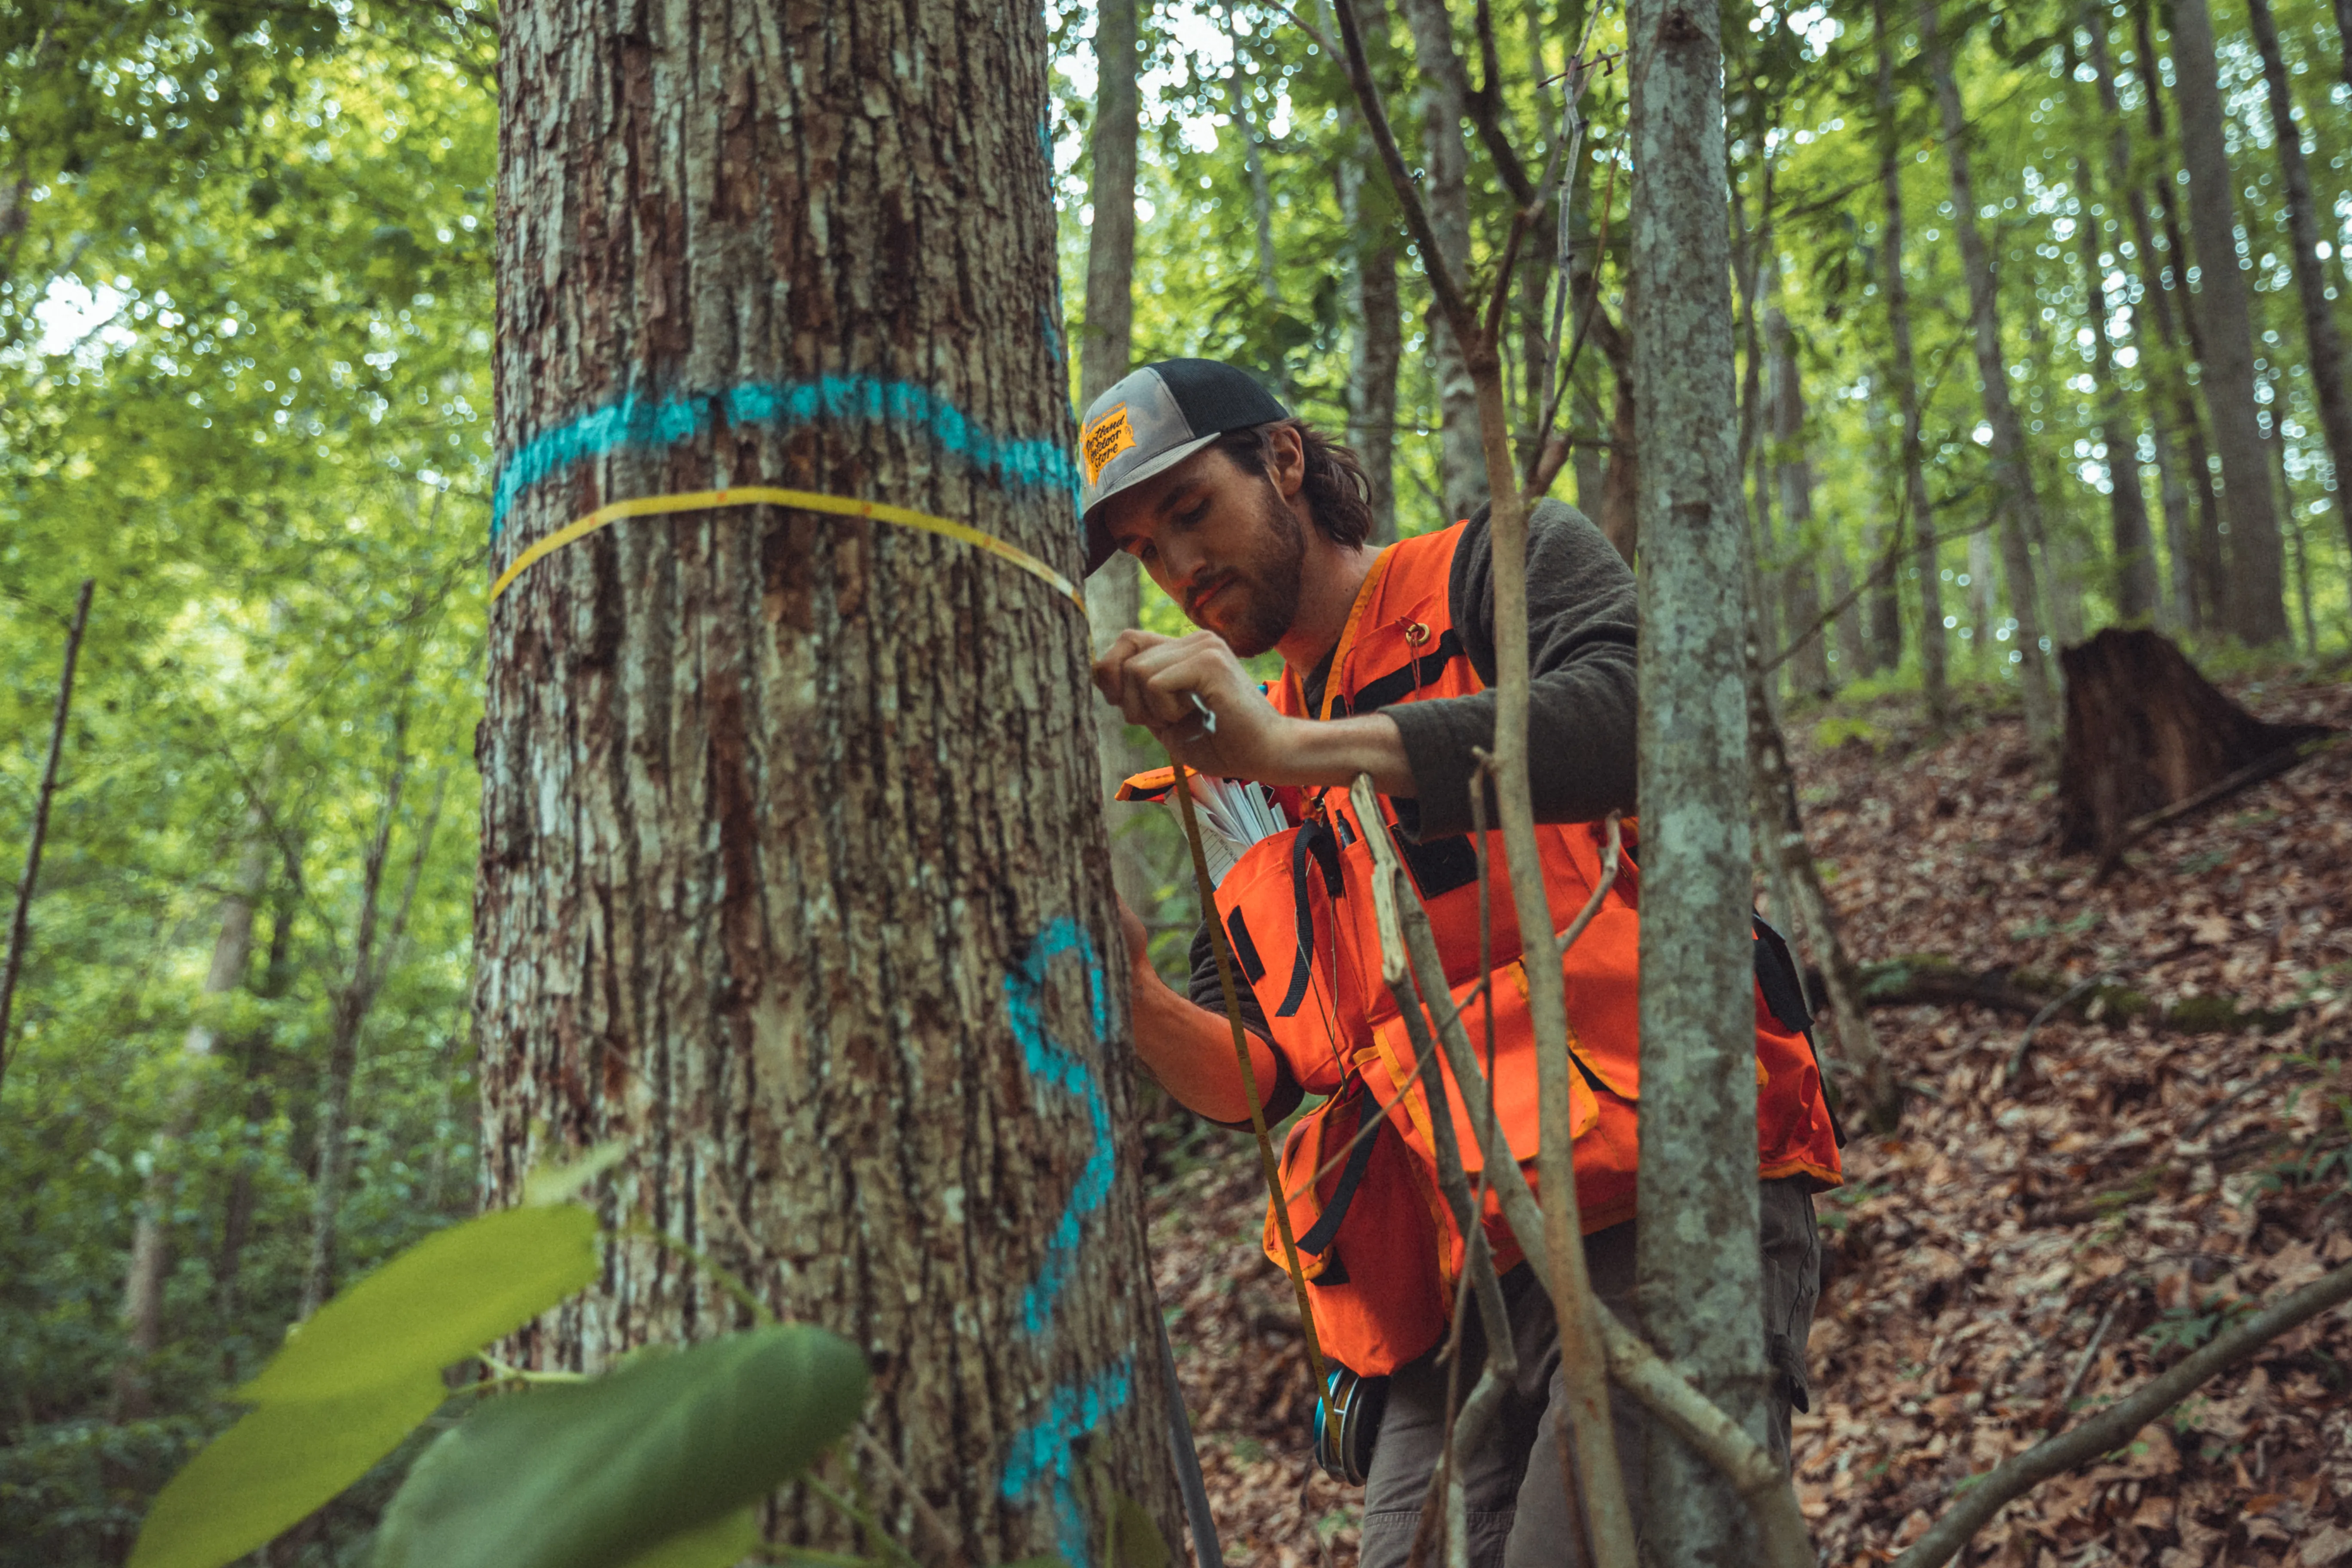 Forester checks tree diameter to help measure any change in growth and carbon stored